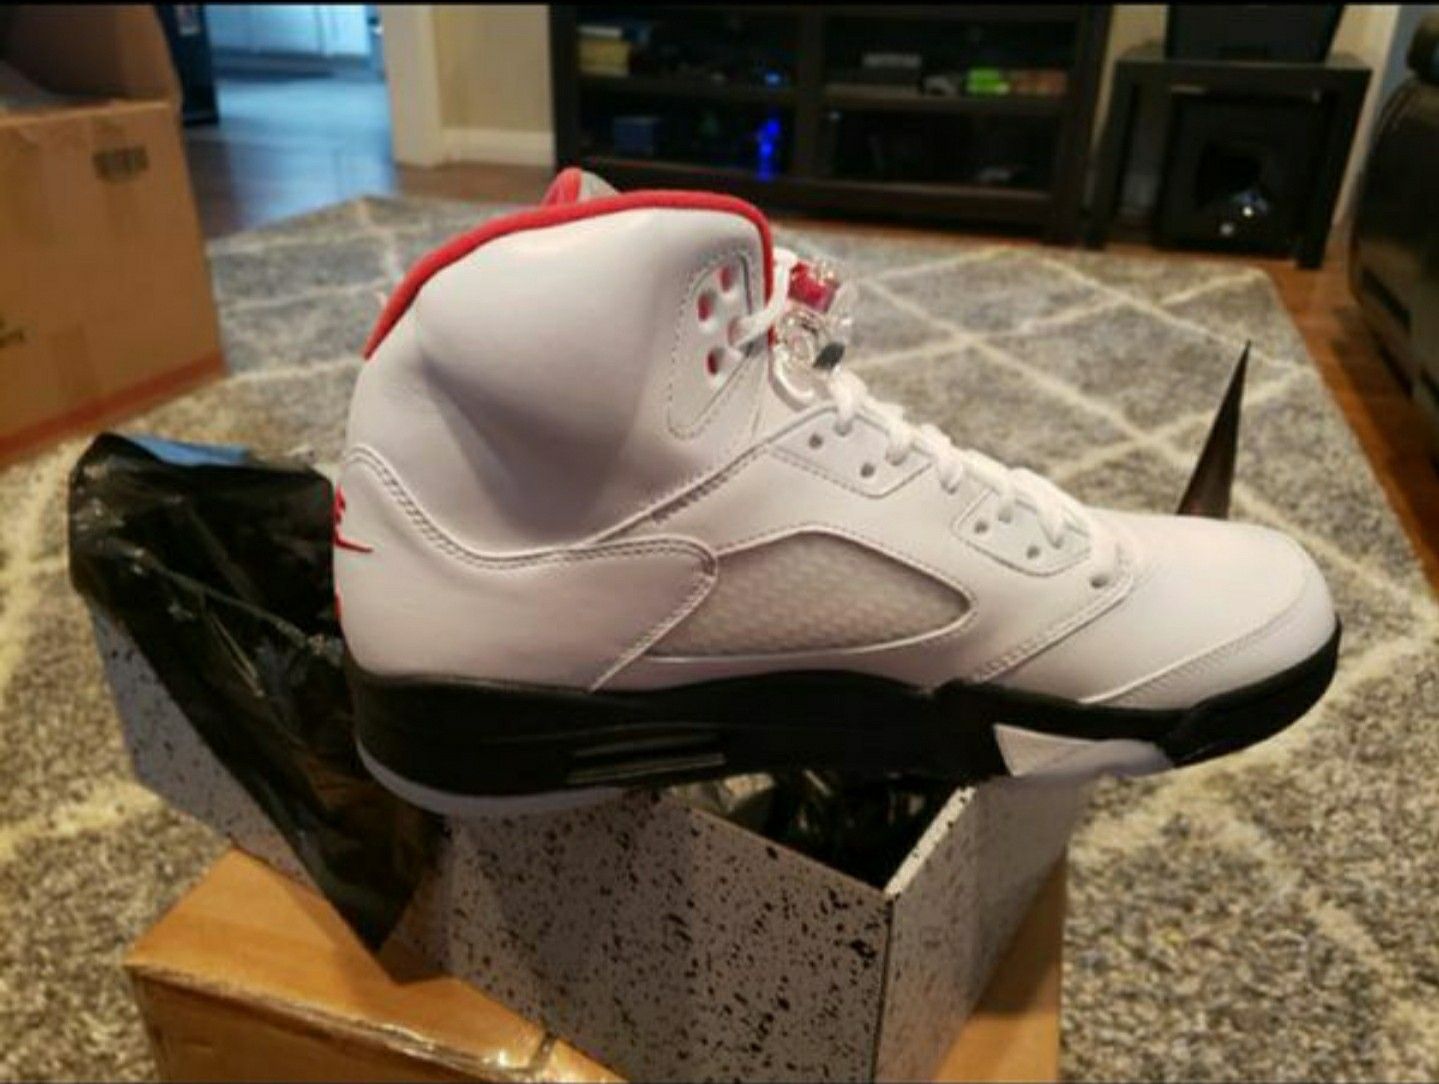 Jordan 5 Retro Fire Red Silver Tongue 2020 Trade or Offers